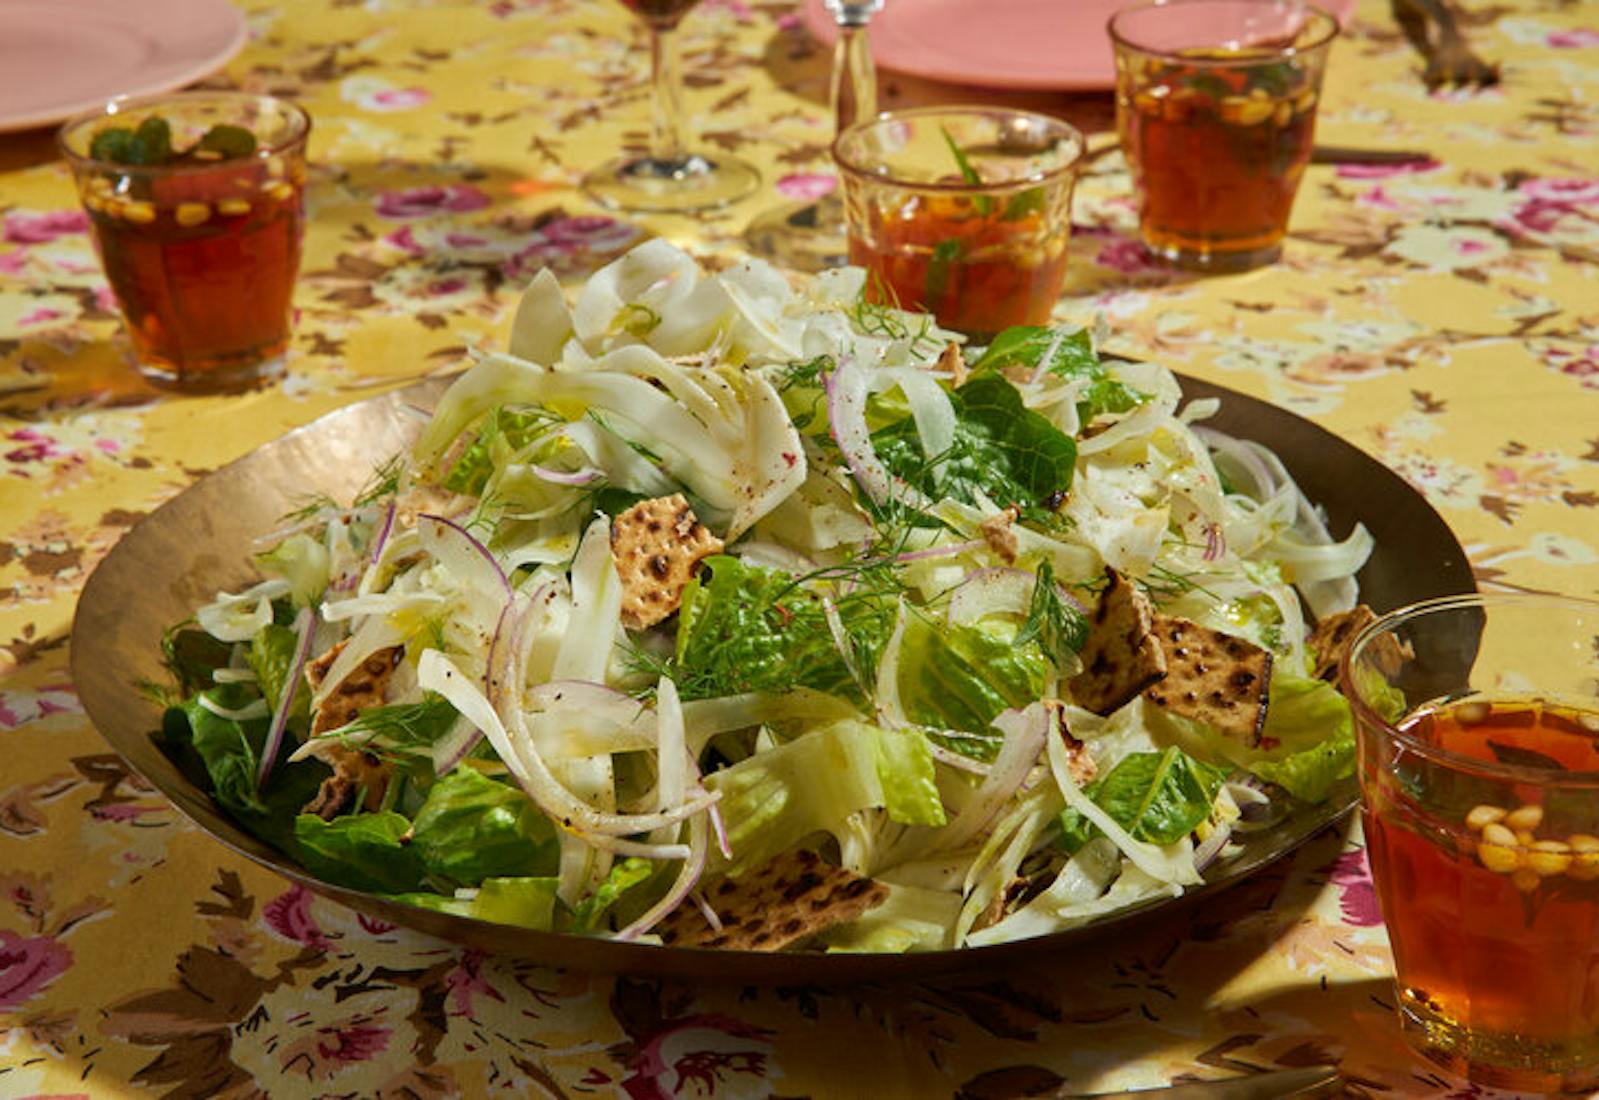 Lettuce and fennel salad garnished with pieces of matzo, mint tea atop yellow floral tablecloth.